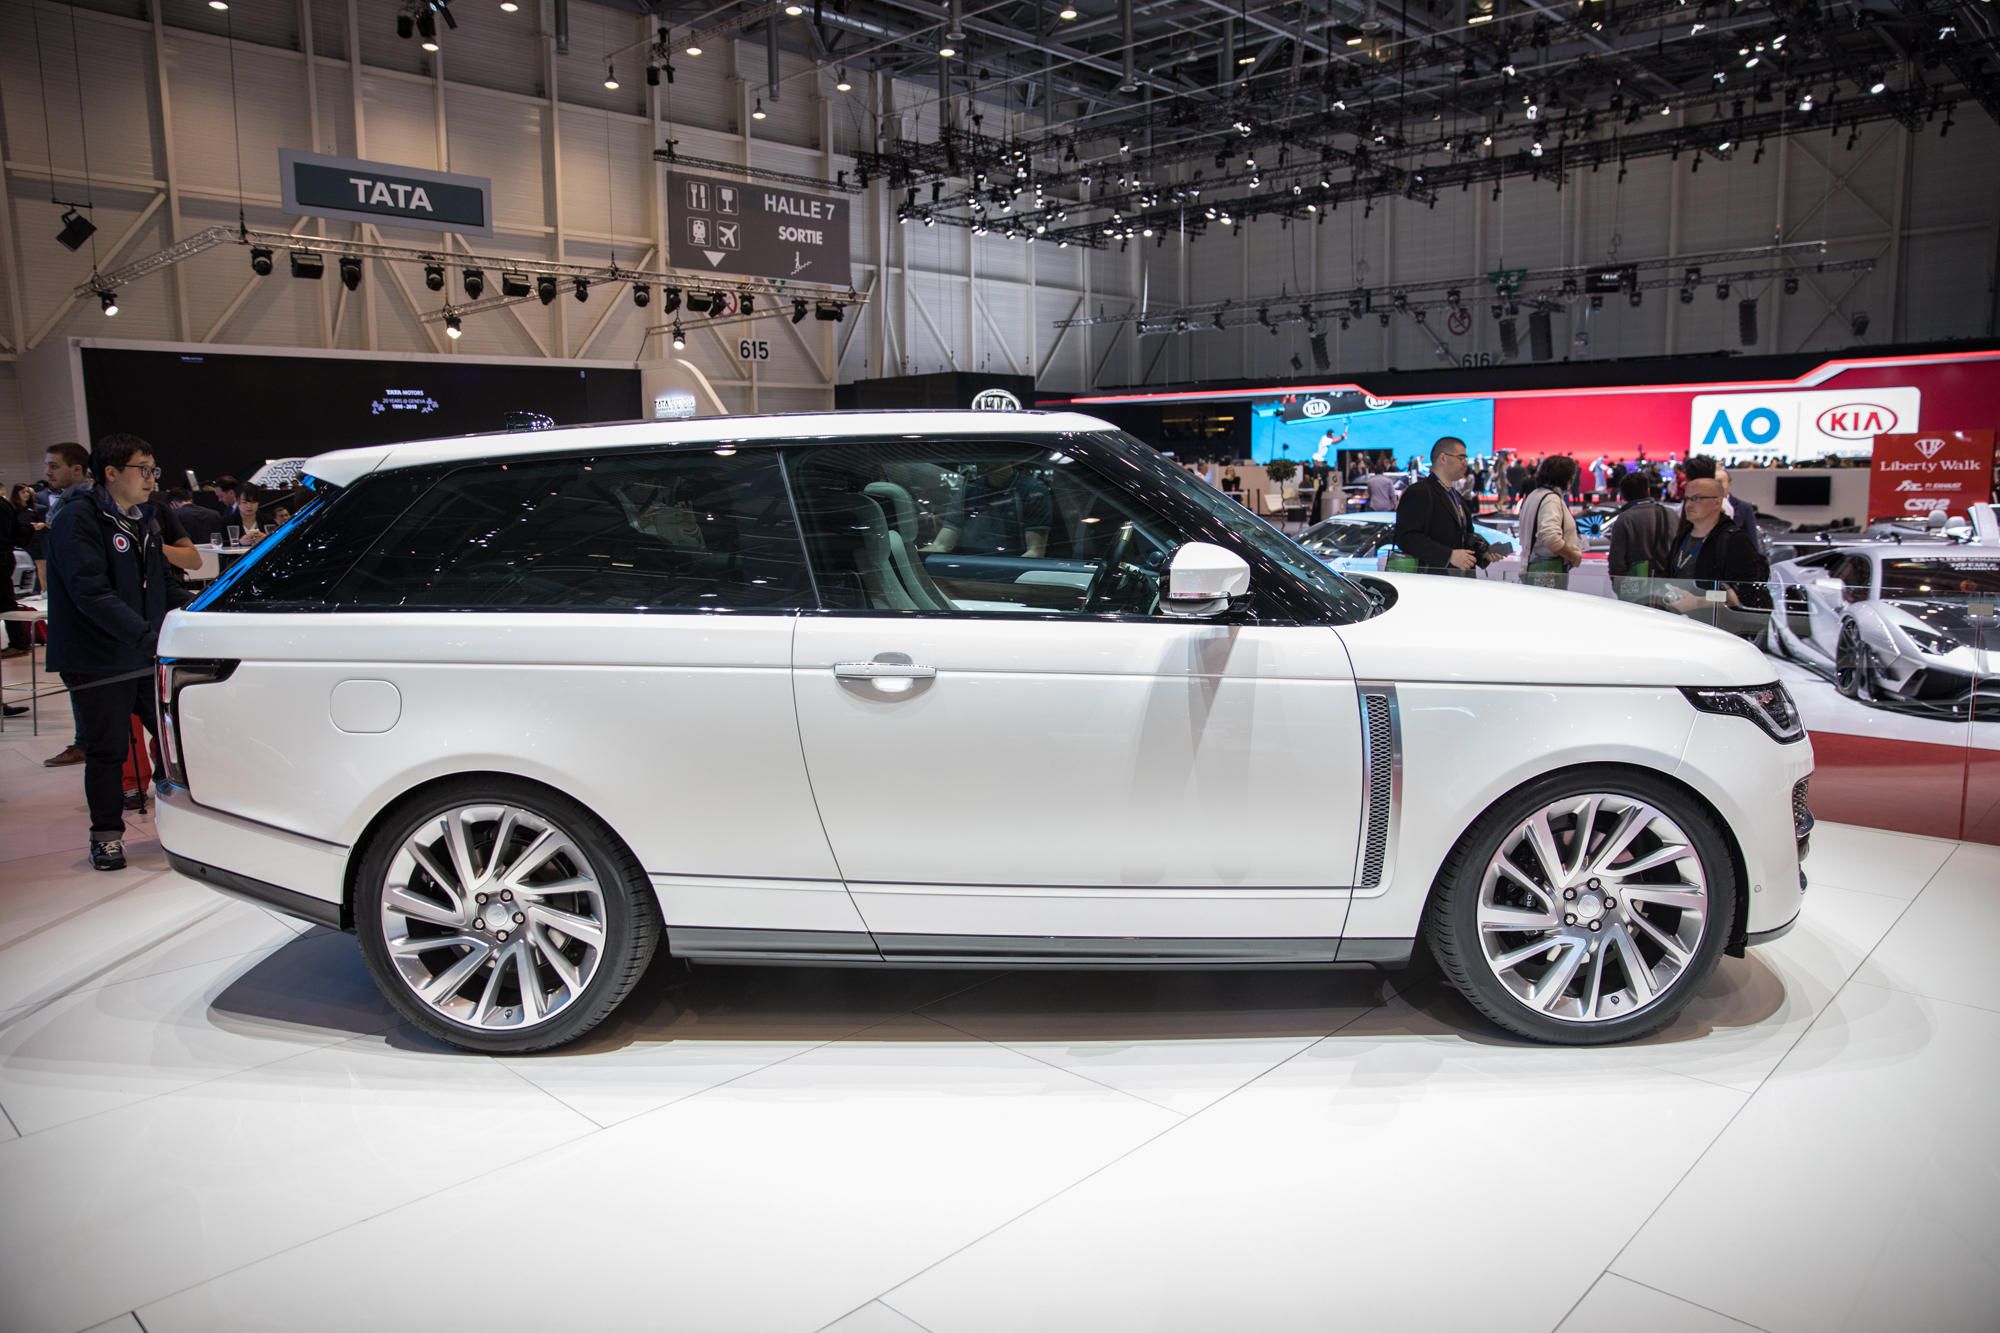 Range Rover SV Coupe is a $295,000 work of art with two doors - Roadshow